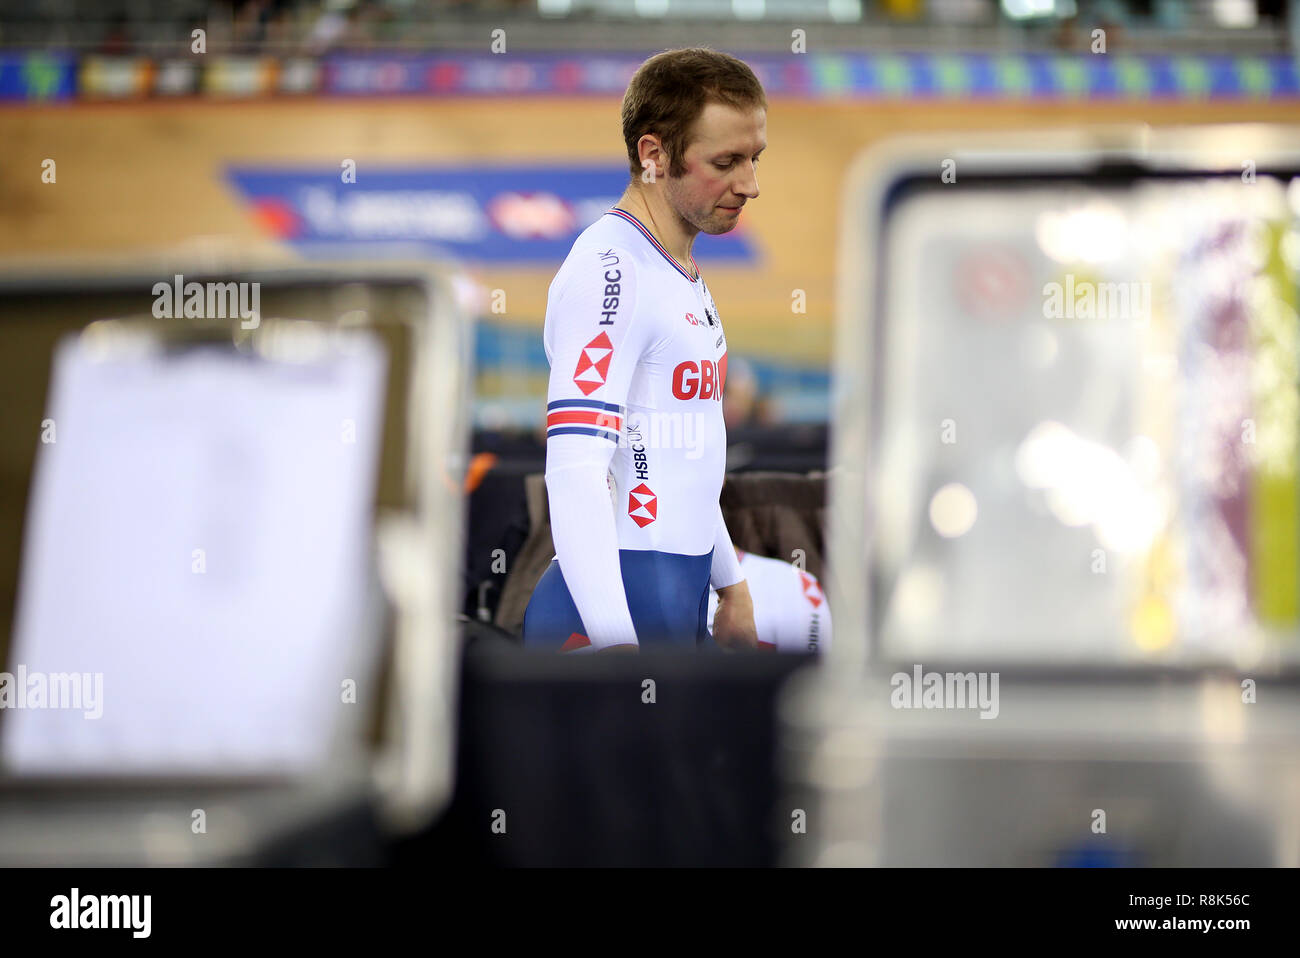 Jason Kenny of Great Britain before the Men's Sprint 1/8 Finals during day three of the Tissot UCI Track Cycling World Cup at Lee Valley VeloPark, London. Stock Photo